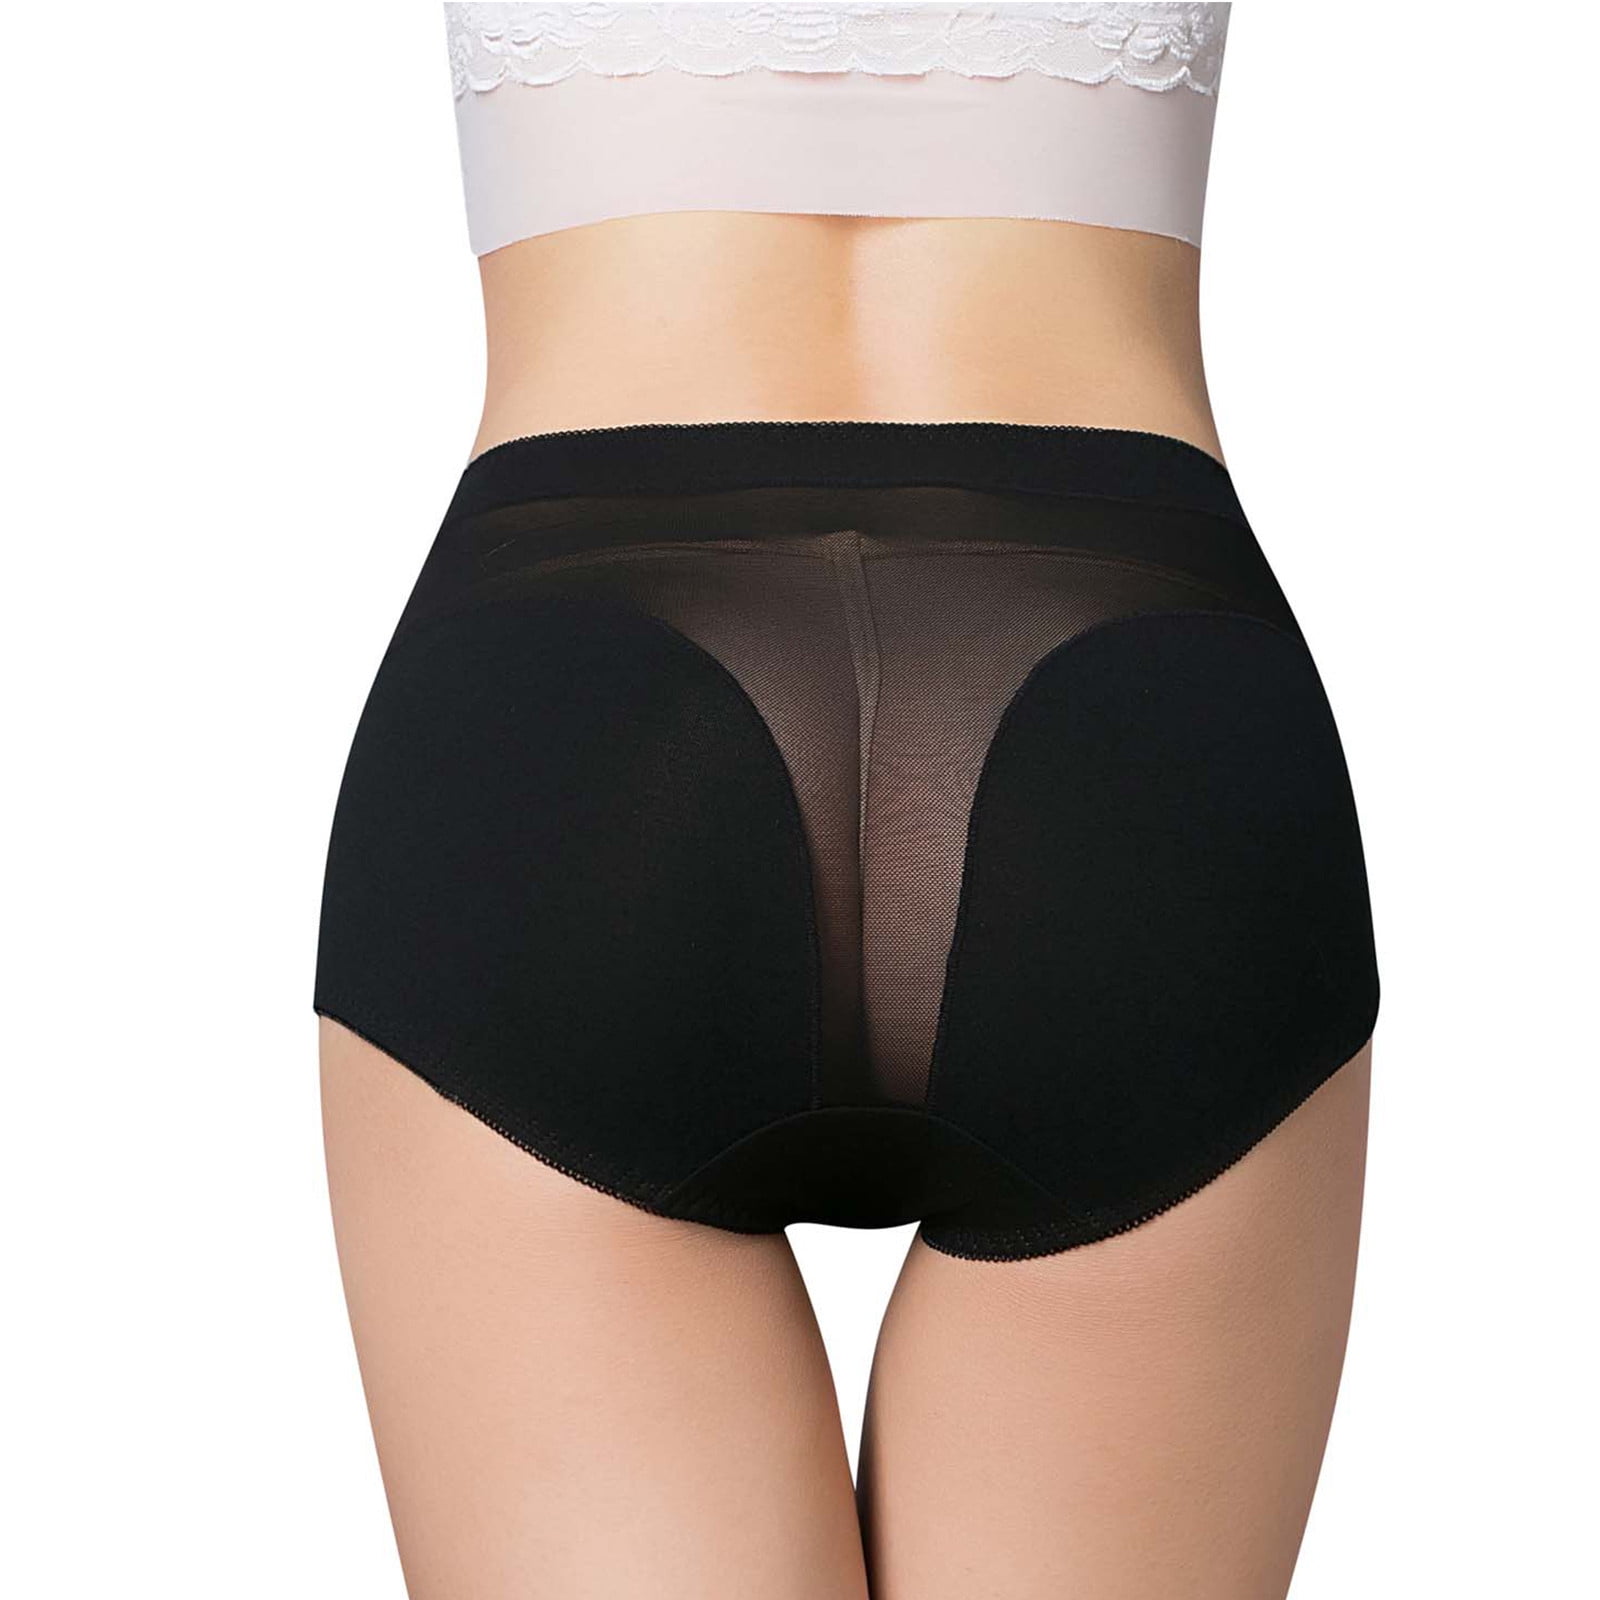 Womens Panties Womens Underwear Cotton Underwear No Muffin Top Full Briefs  Soft Breathable Ladies Panties For Women 